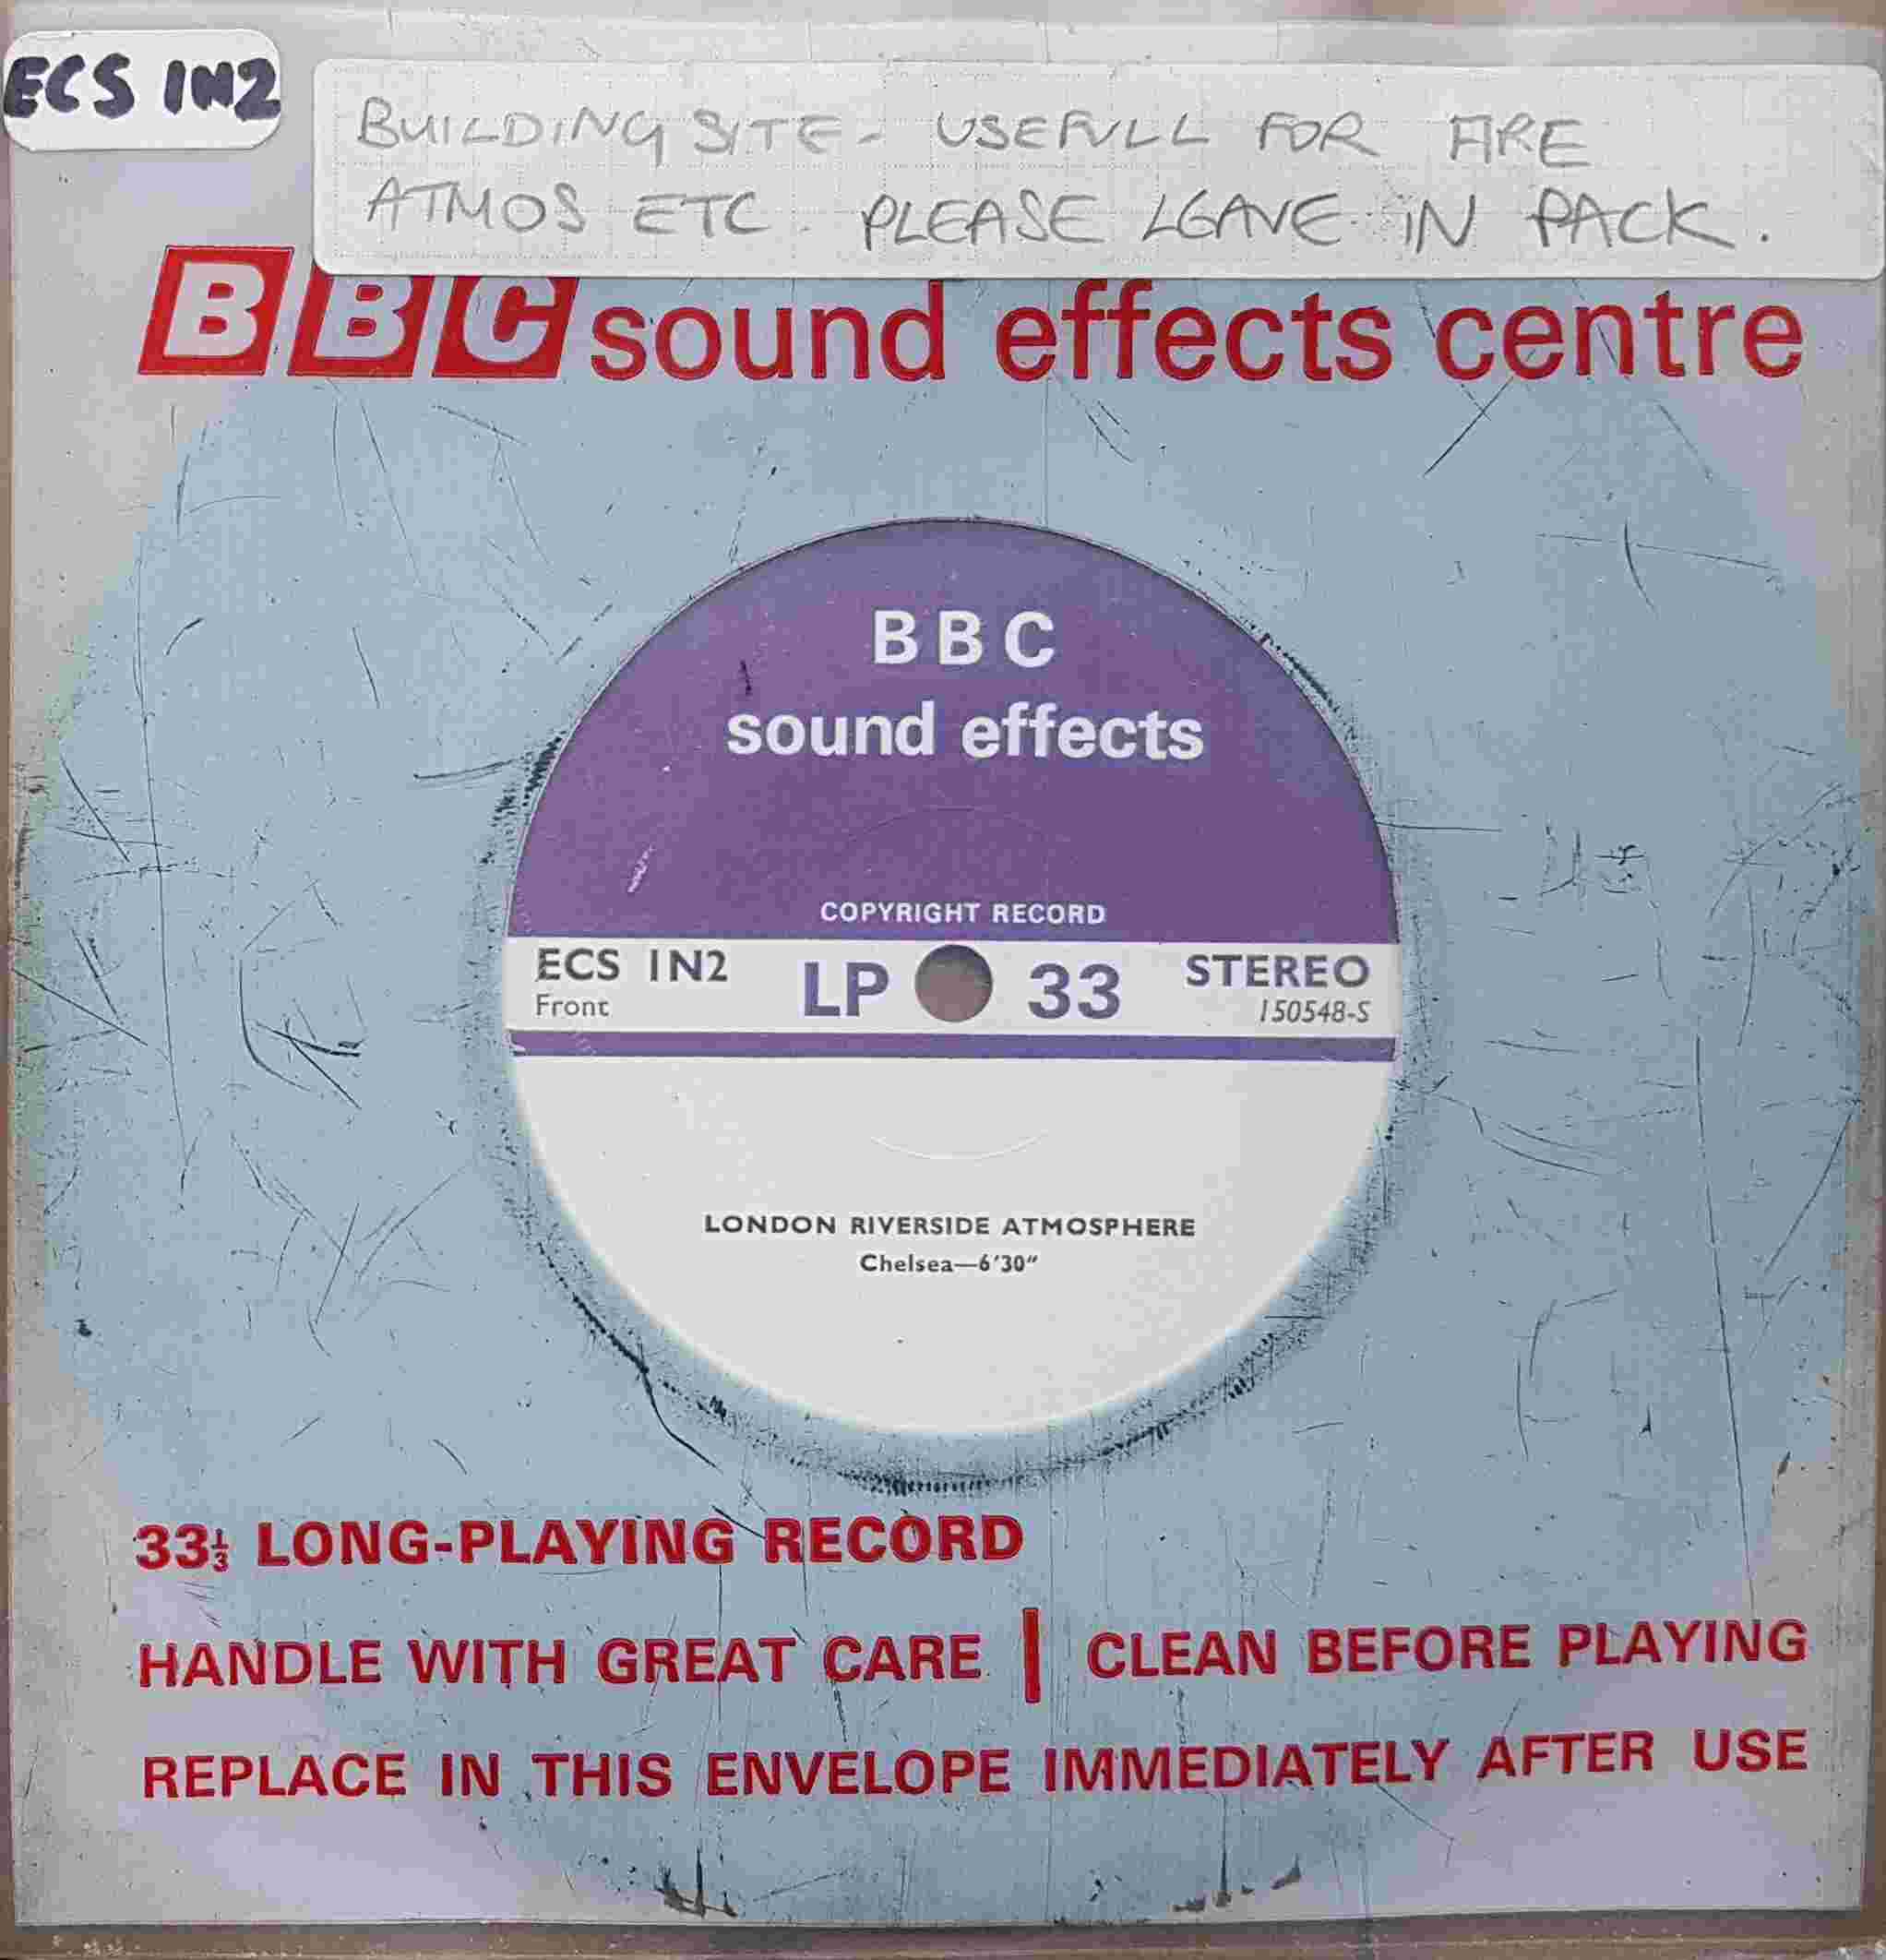 Picture of ECS 1N2 London Riverside atmosphere - Chelsea / Building site atmosphere by artist Not registered from the BBC records and Tapes library